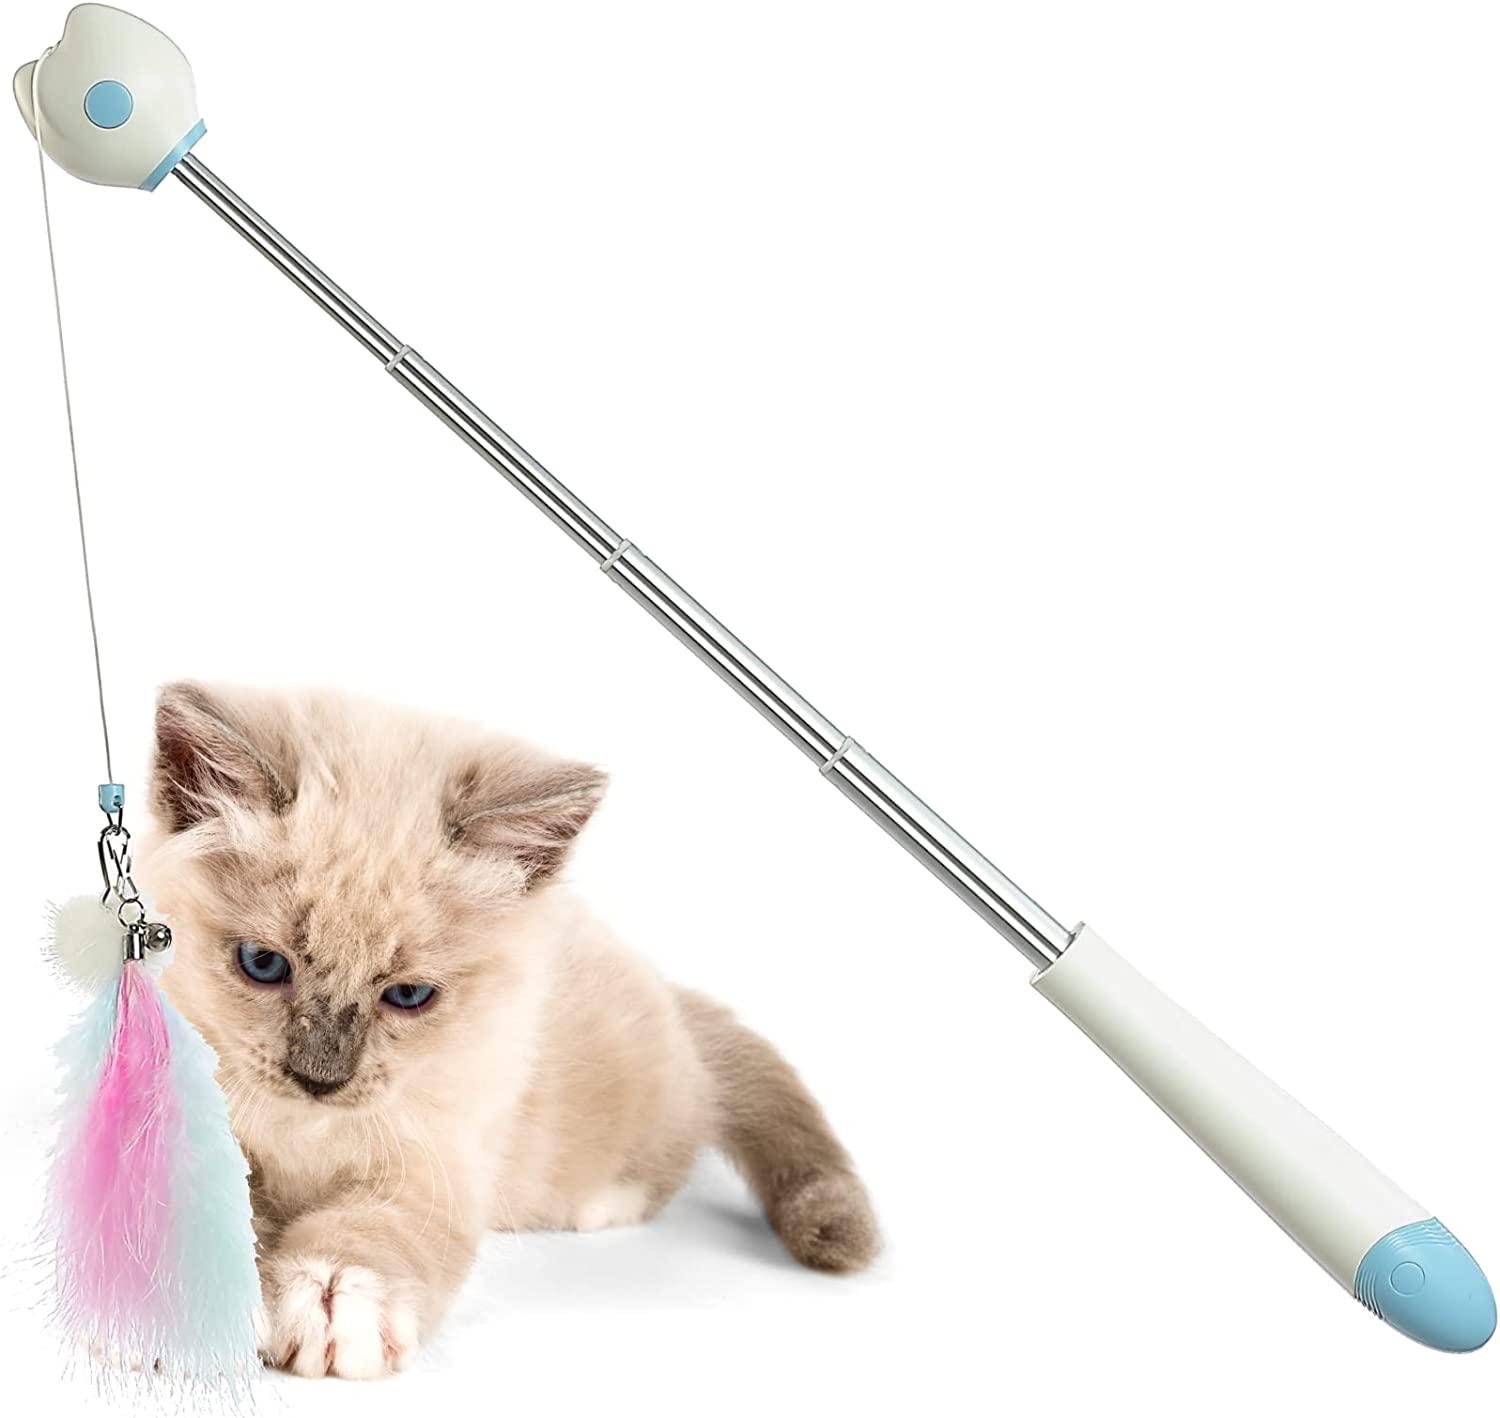 PETVERA Retractable Wand Cat Toy - Interactive Feather String Toys Indoor -  Best Teaser Laser Toy for Kitten Pack to Play Chase Fun Exercise - Stick  for Cat Fishing (Blue)